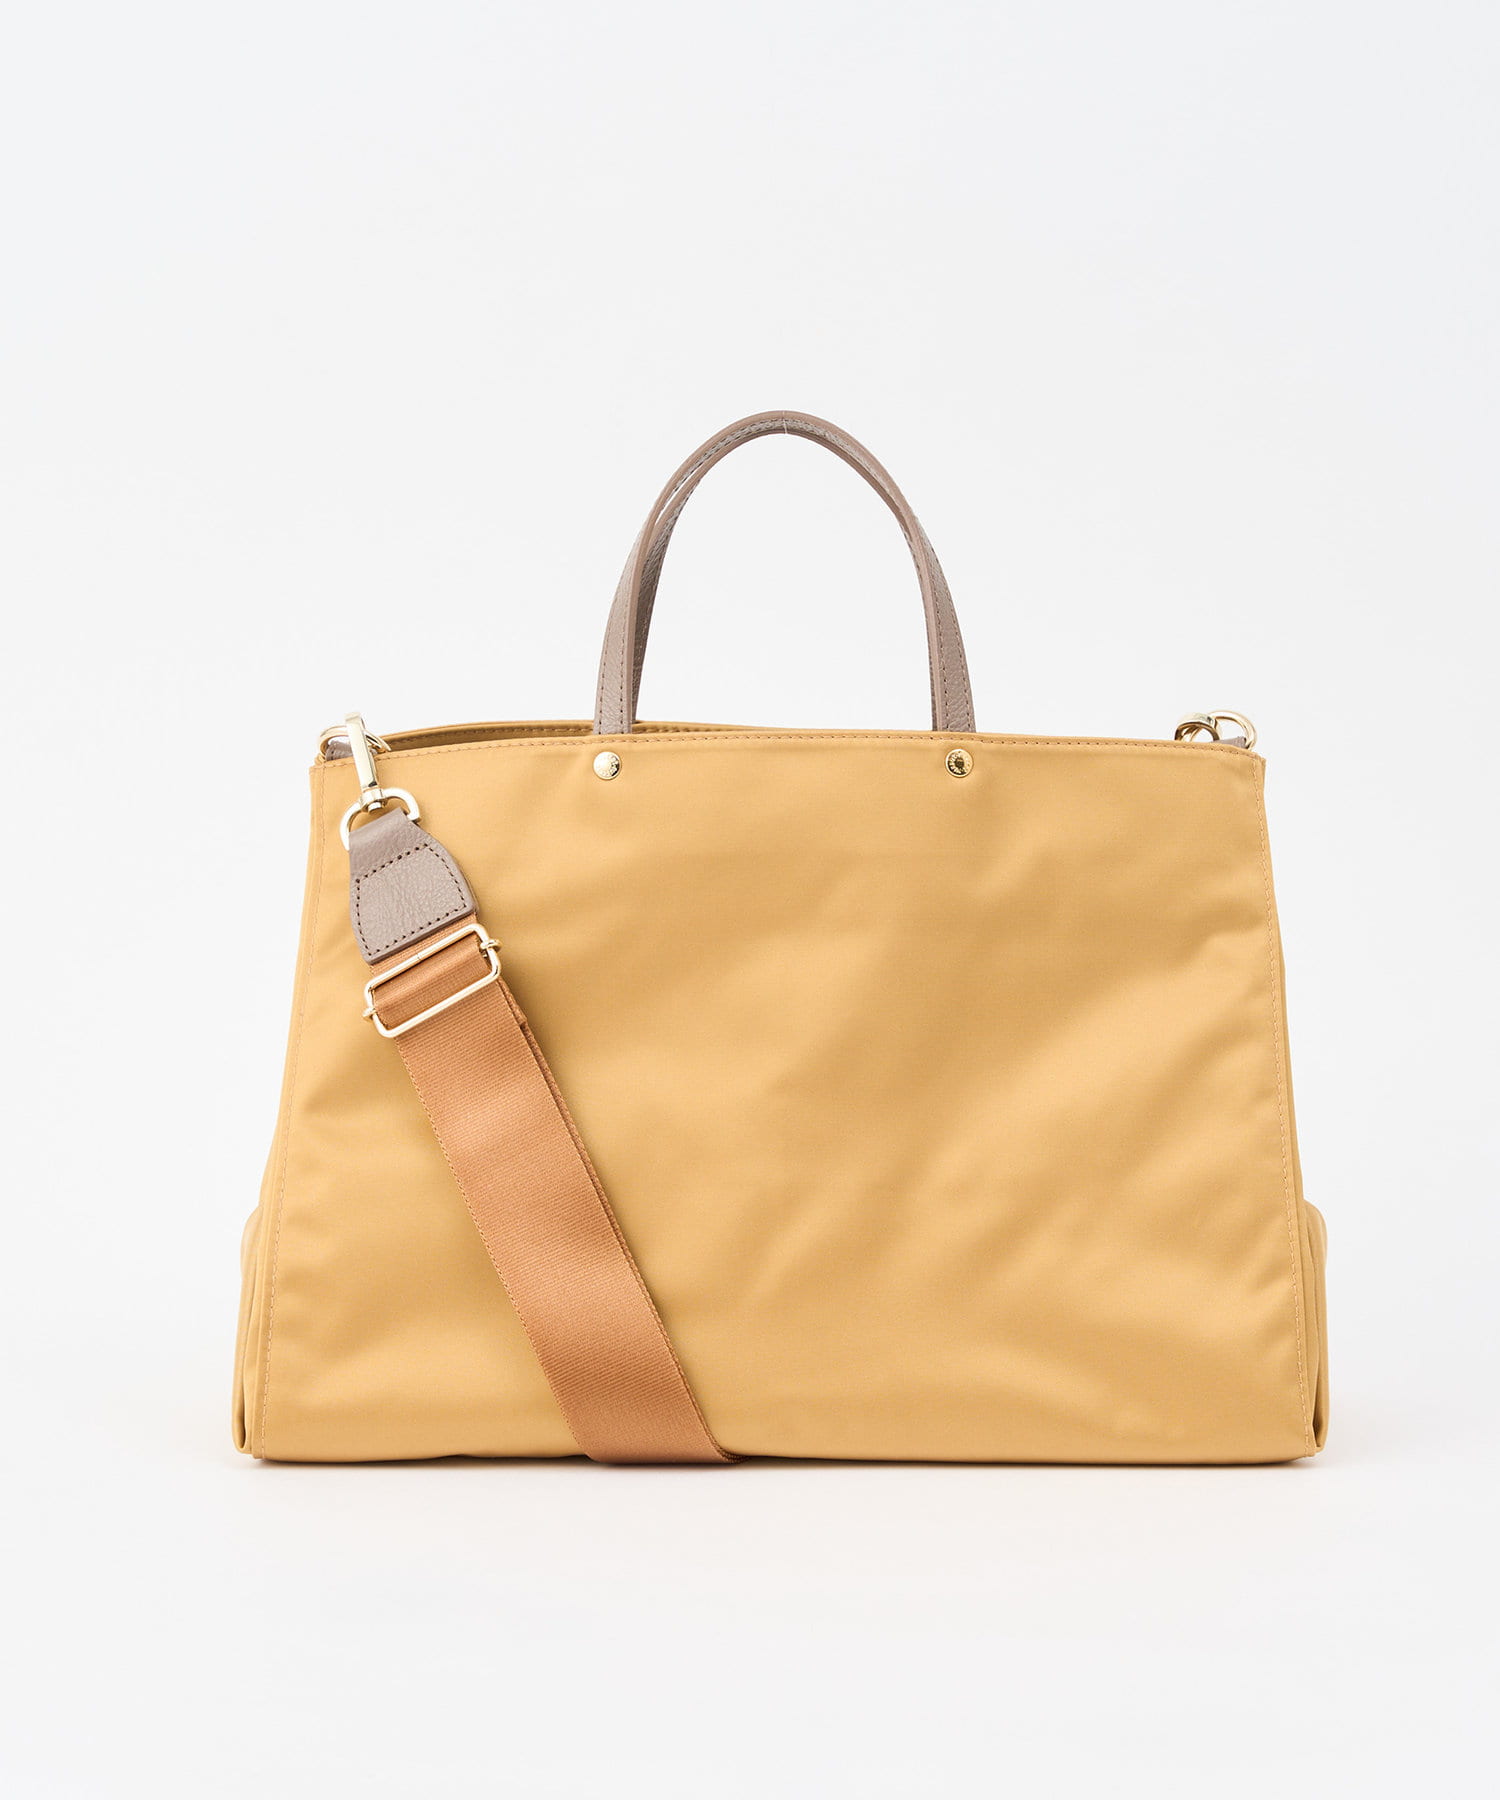 SHOPPER》トートバッグ M【THE CLOUDS NYLON】 | russet(ラシット 